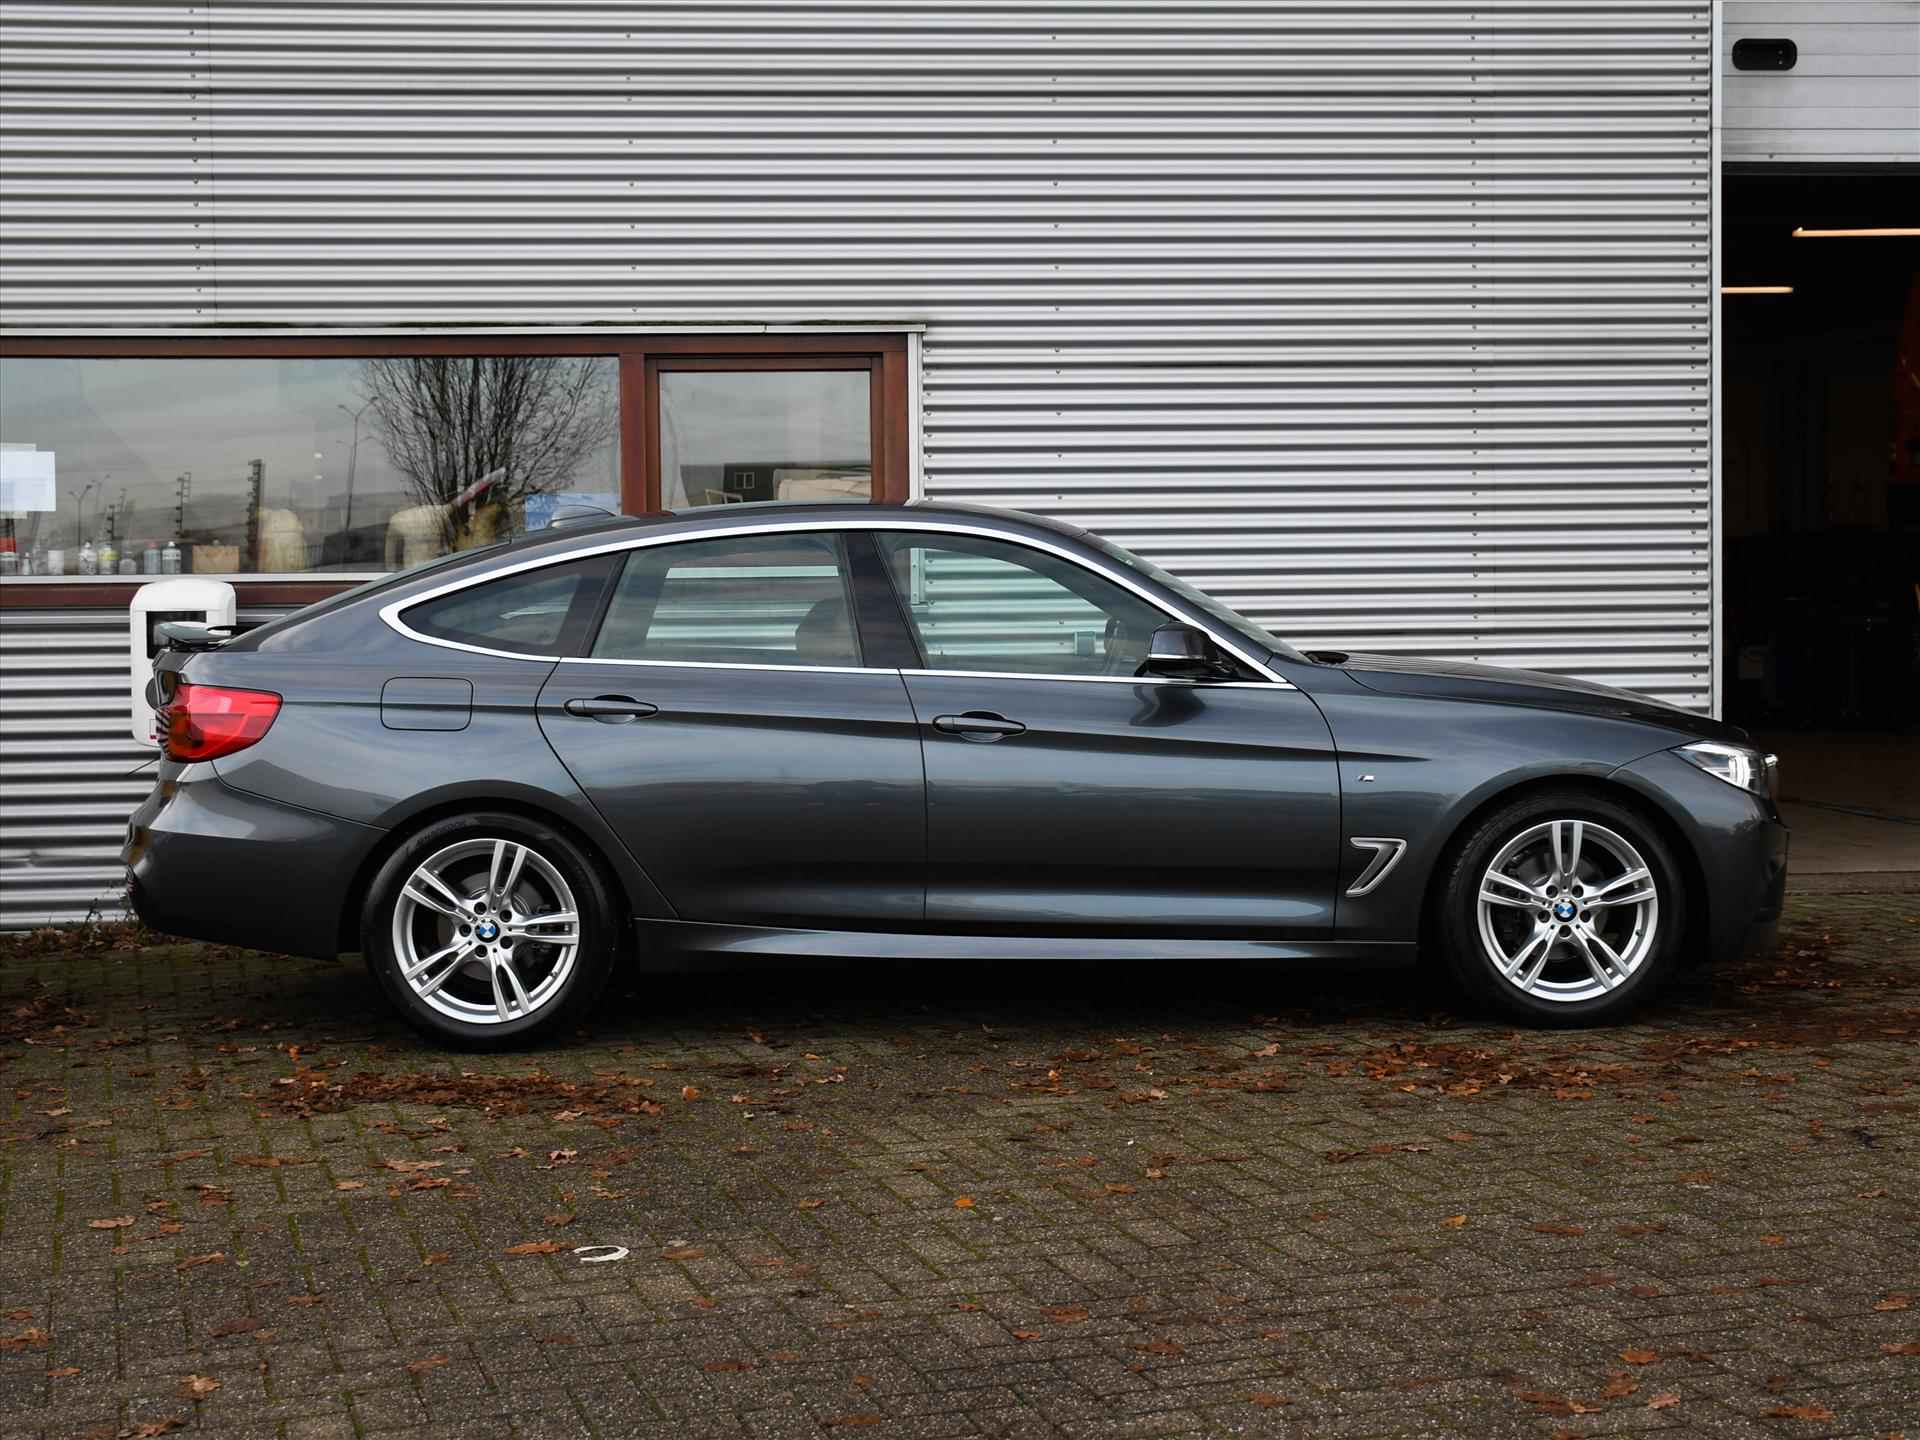 BMW 3-Serie Gran Turismo (f34) 320i High Executive XDrive 184pk Automaat CRUISE.C | PDC | LED | LEDER | 18''LM | NAVI | STOELVERW. VOOR - 3/34